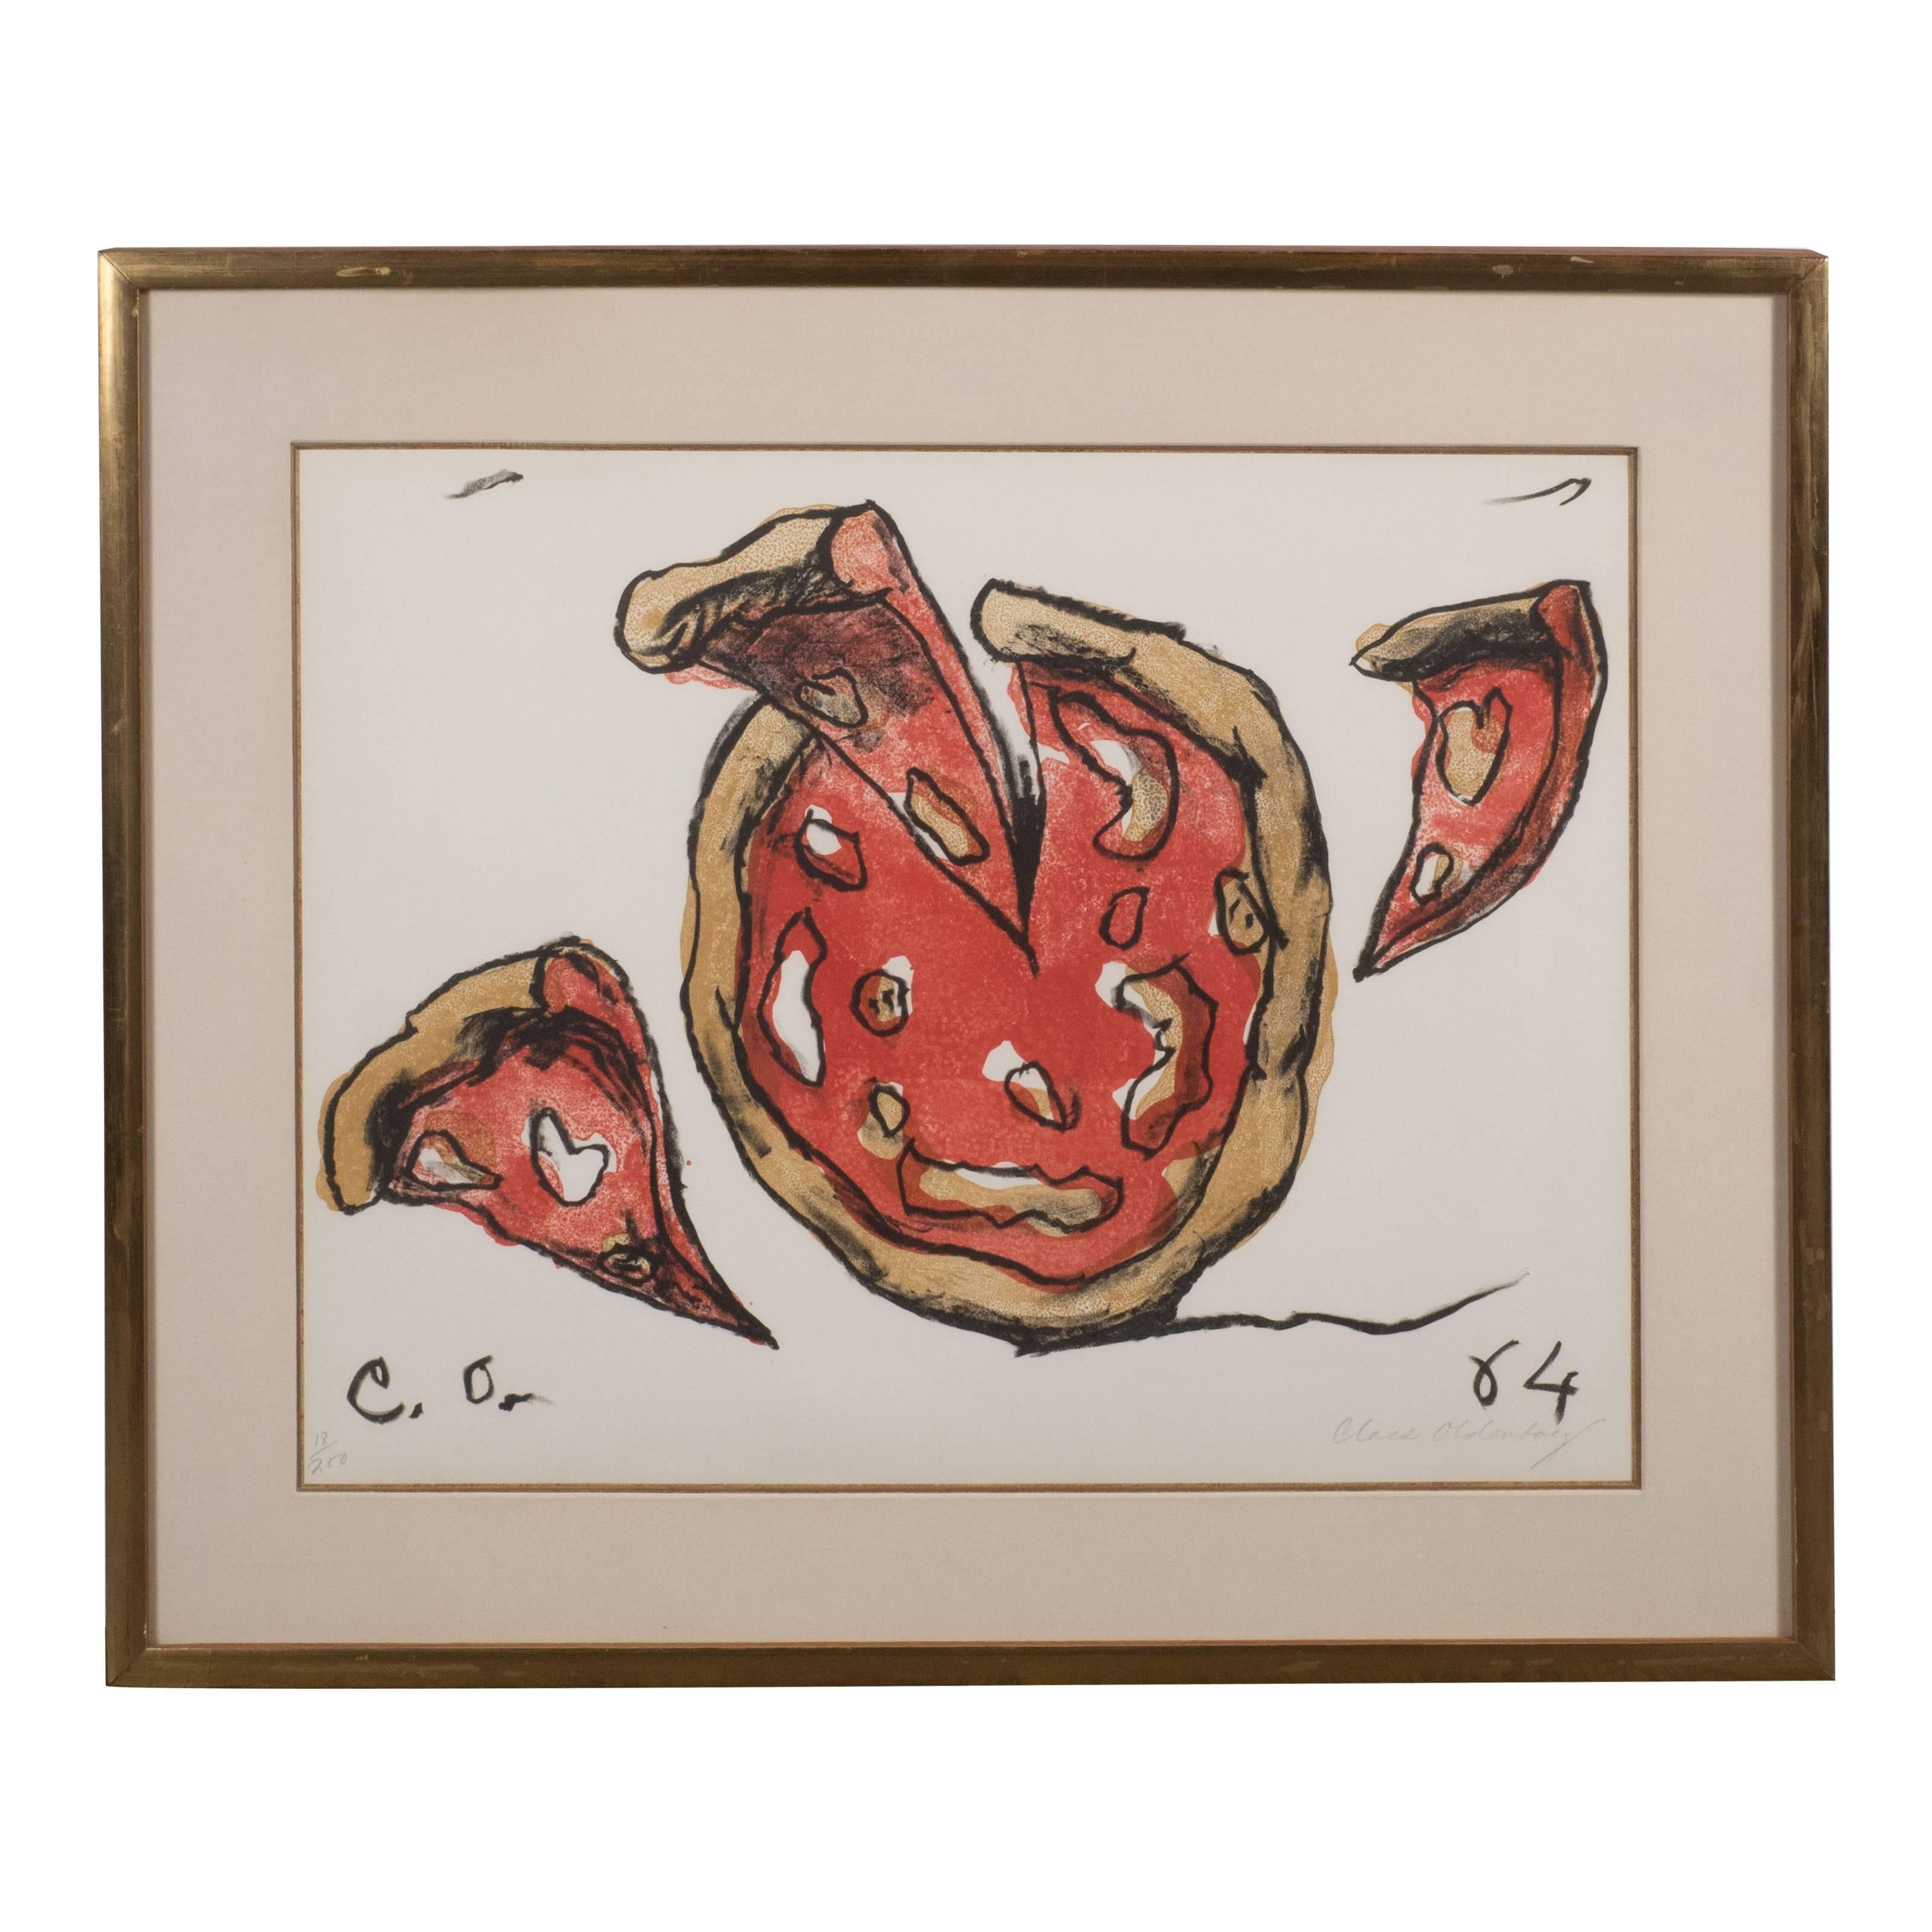 Mid-Century Modernist Original Lithograph by Claes Oldenburg "Flying Pizza"